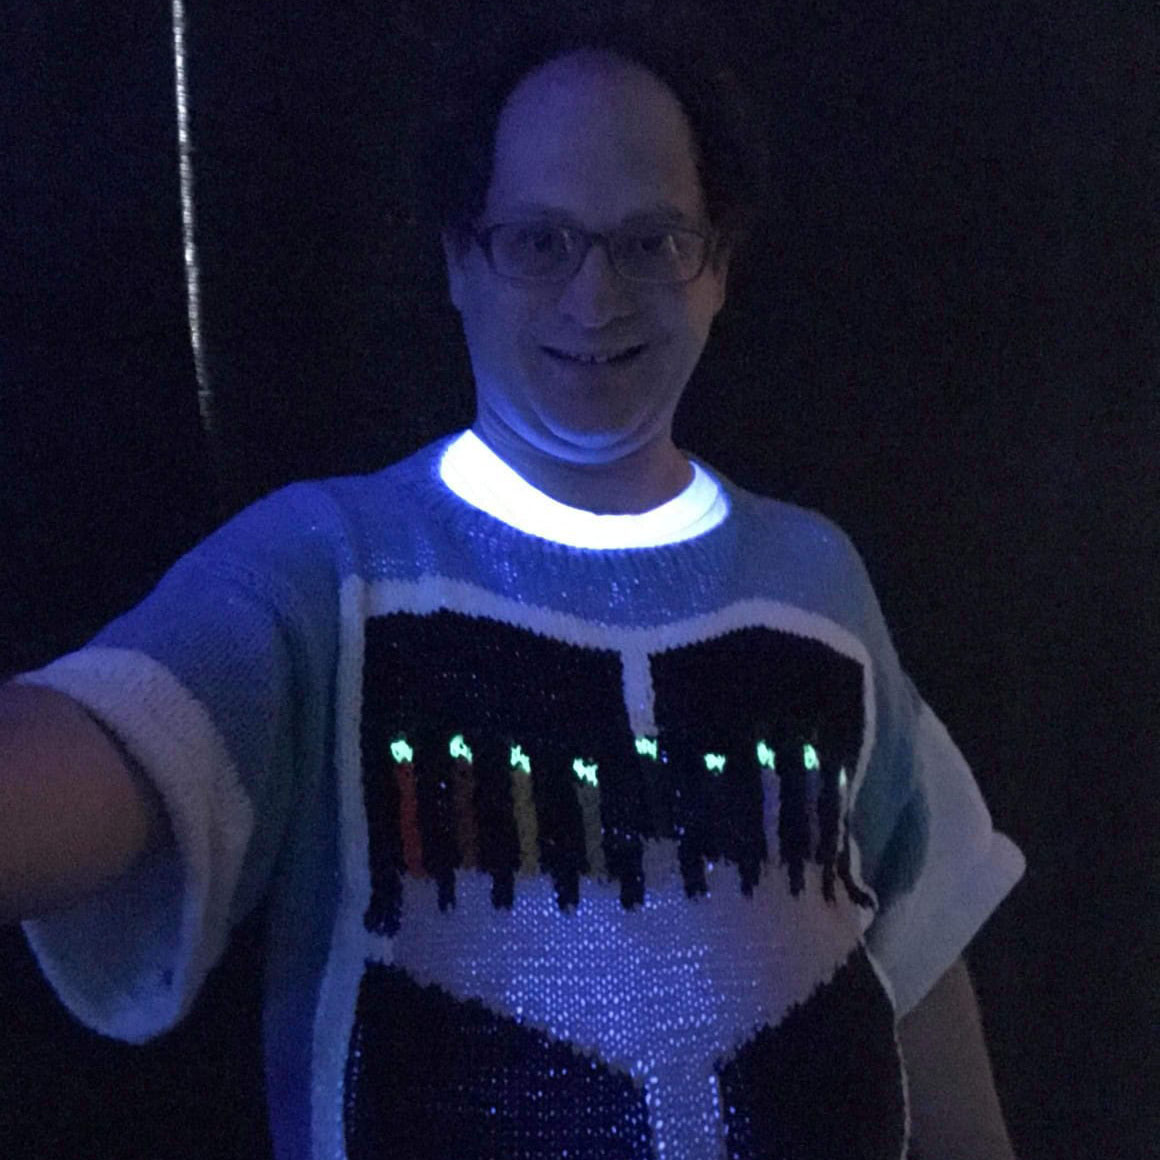 The favorite sweater for Bersky's fans &#8211; a menorah glowing in the dark (Photo: Private album)